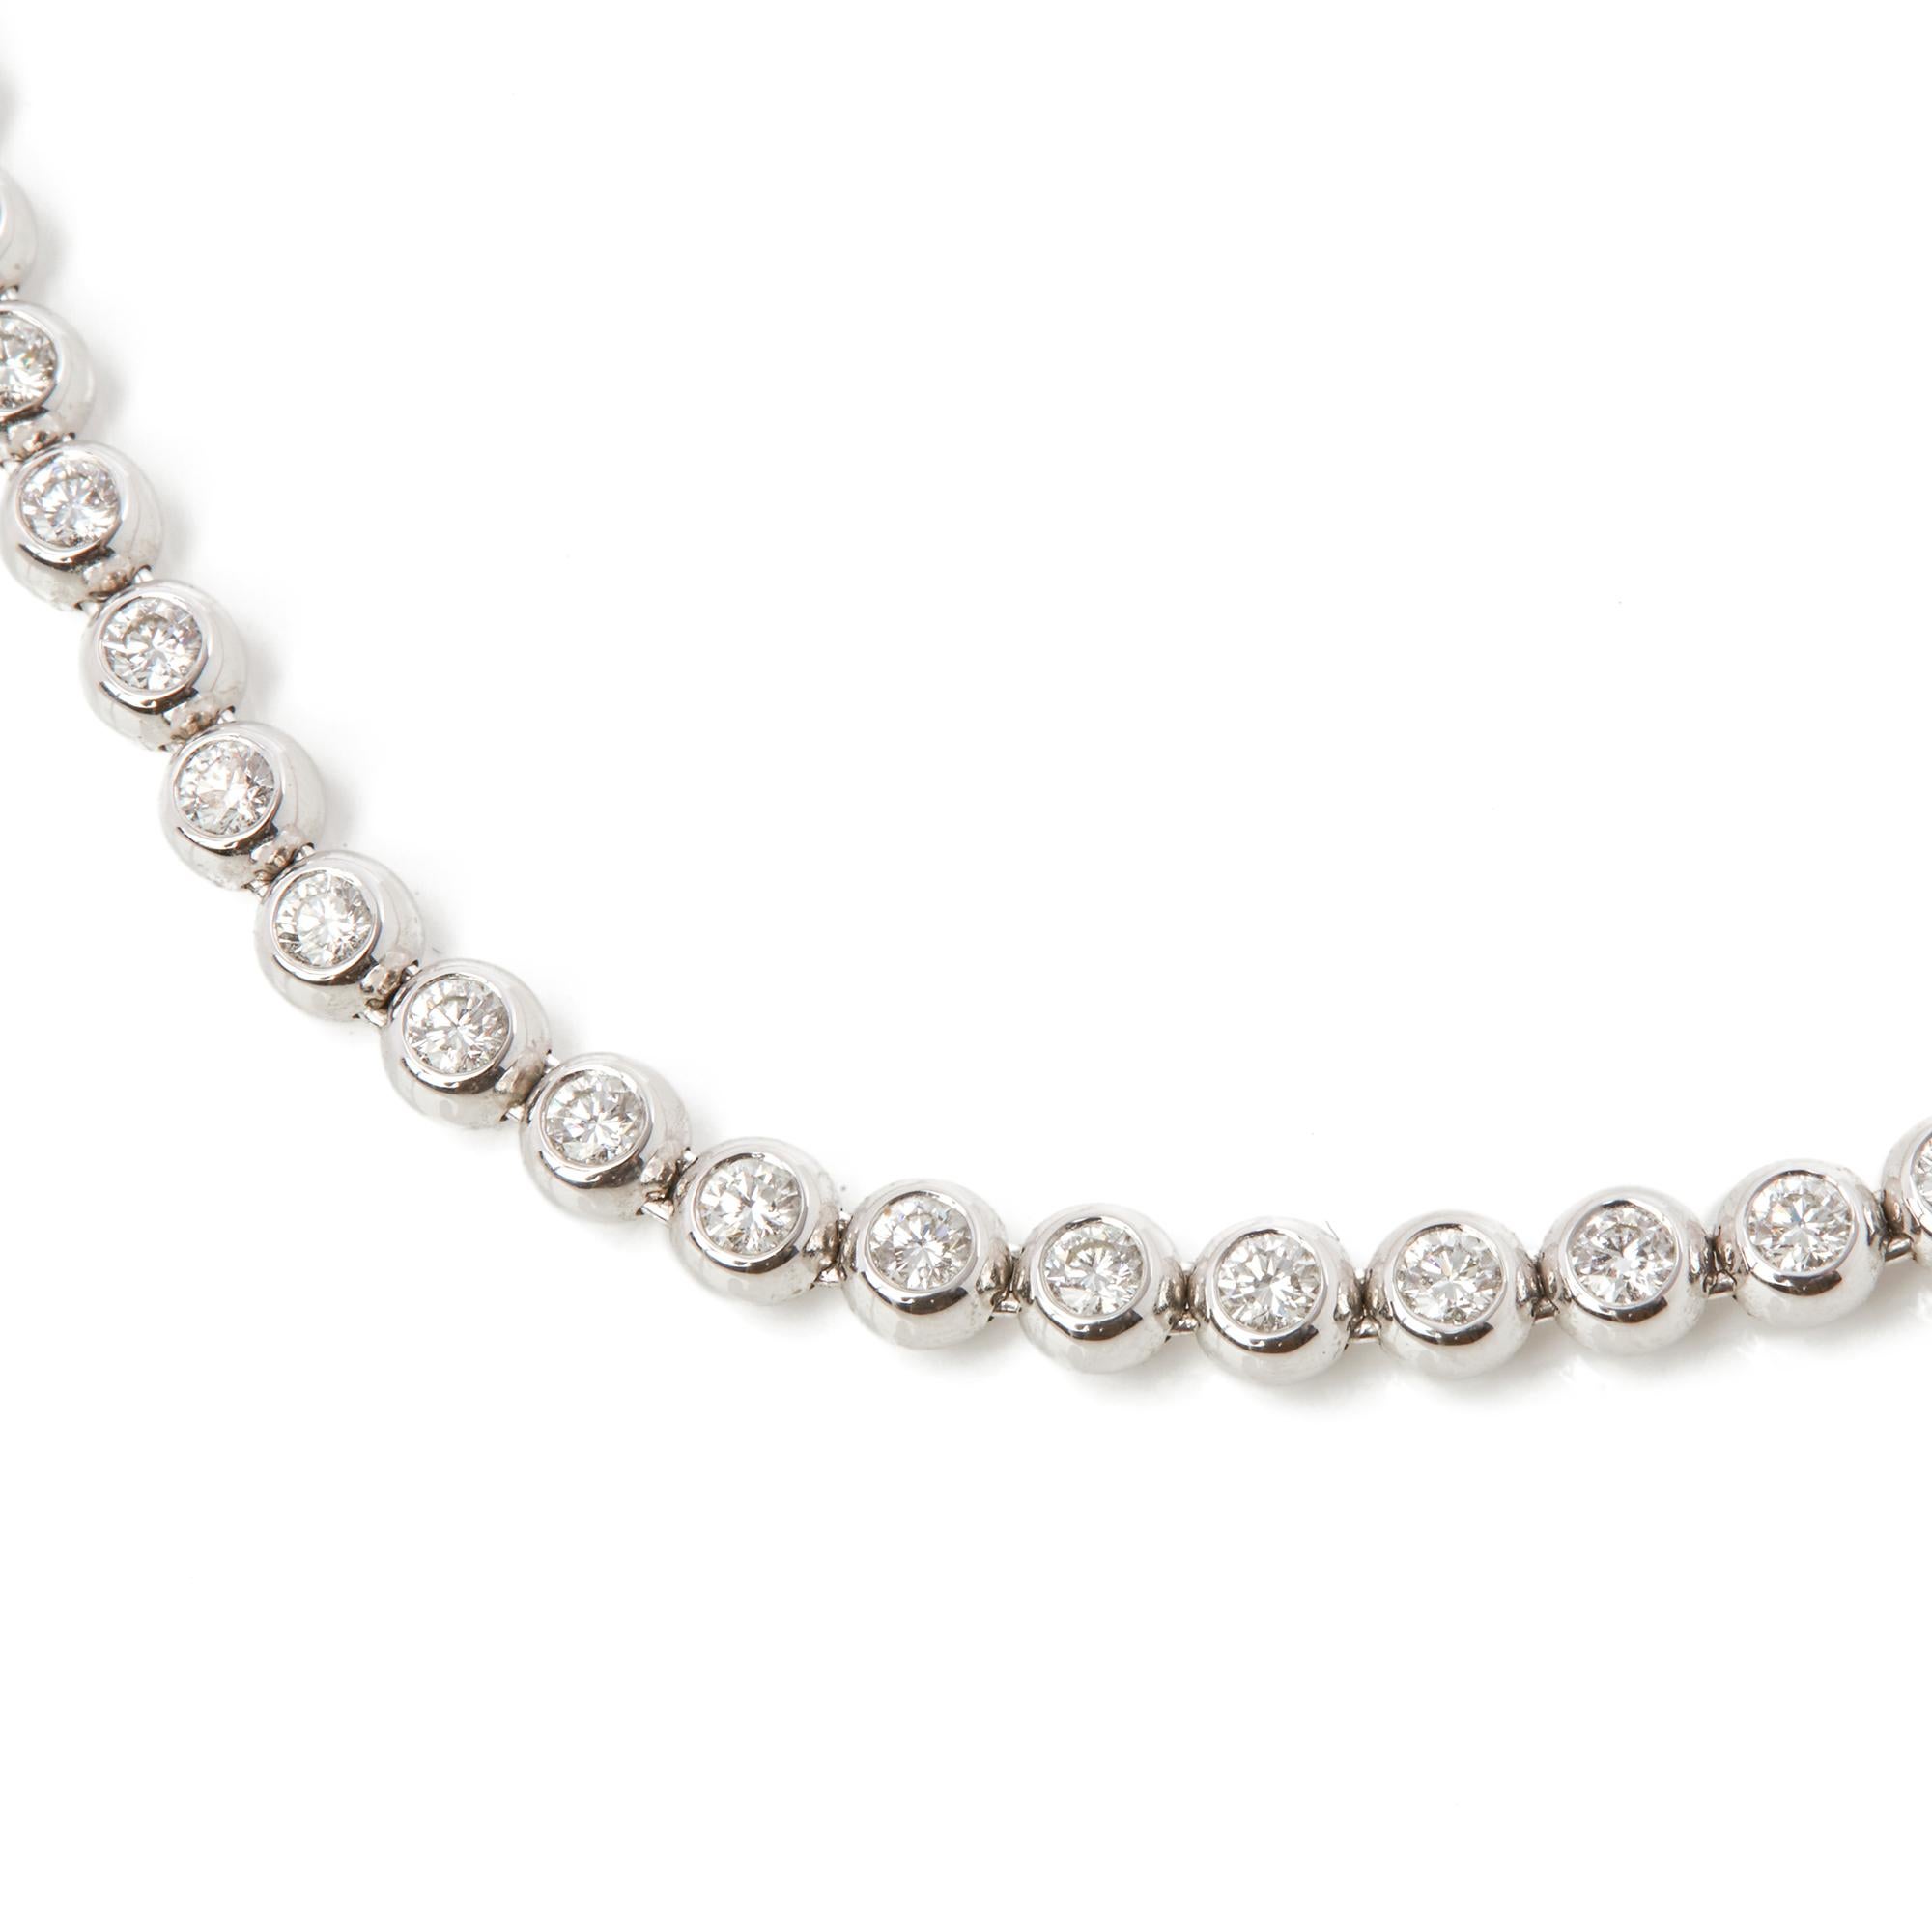 Code: COM2020
Description: 18k White Gold Beaded 4.50ct Diamond Necklace
Accompanied With: Presentation Box
Gender: Ladies
Necklace Length: 38cm
Necklace Width: 3mm
Clasp Type: Push Button
Condition: 9
Material: White Gold
Total Weight: 34.12g